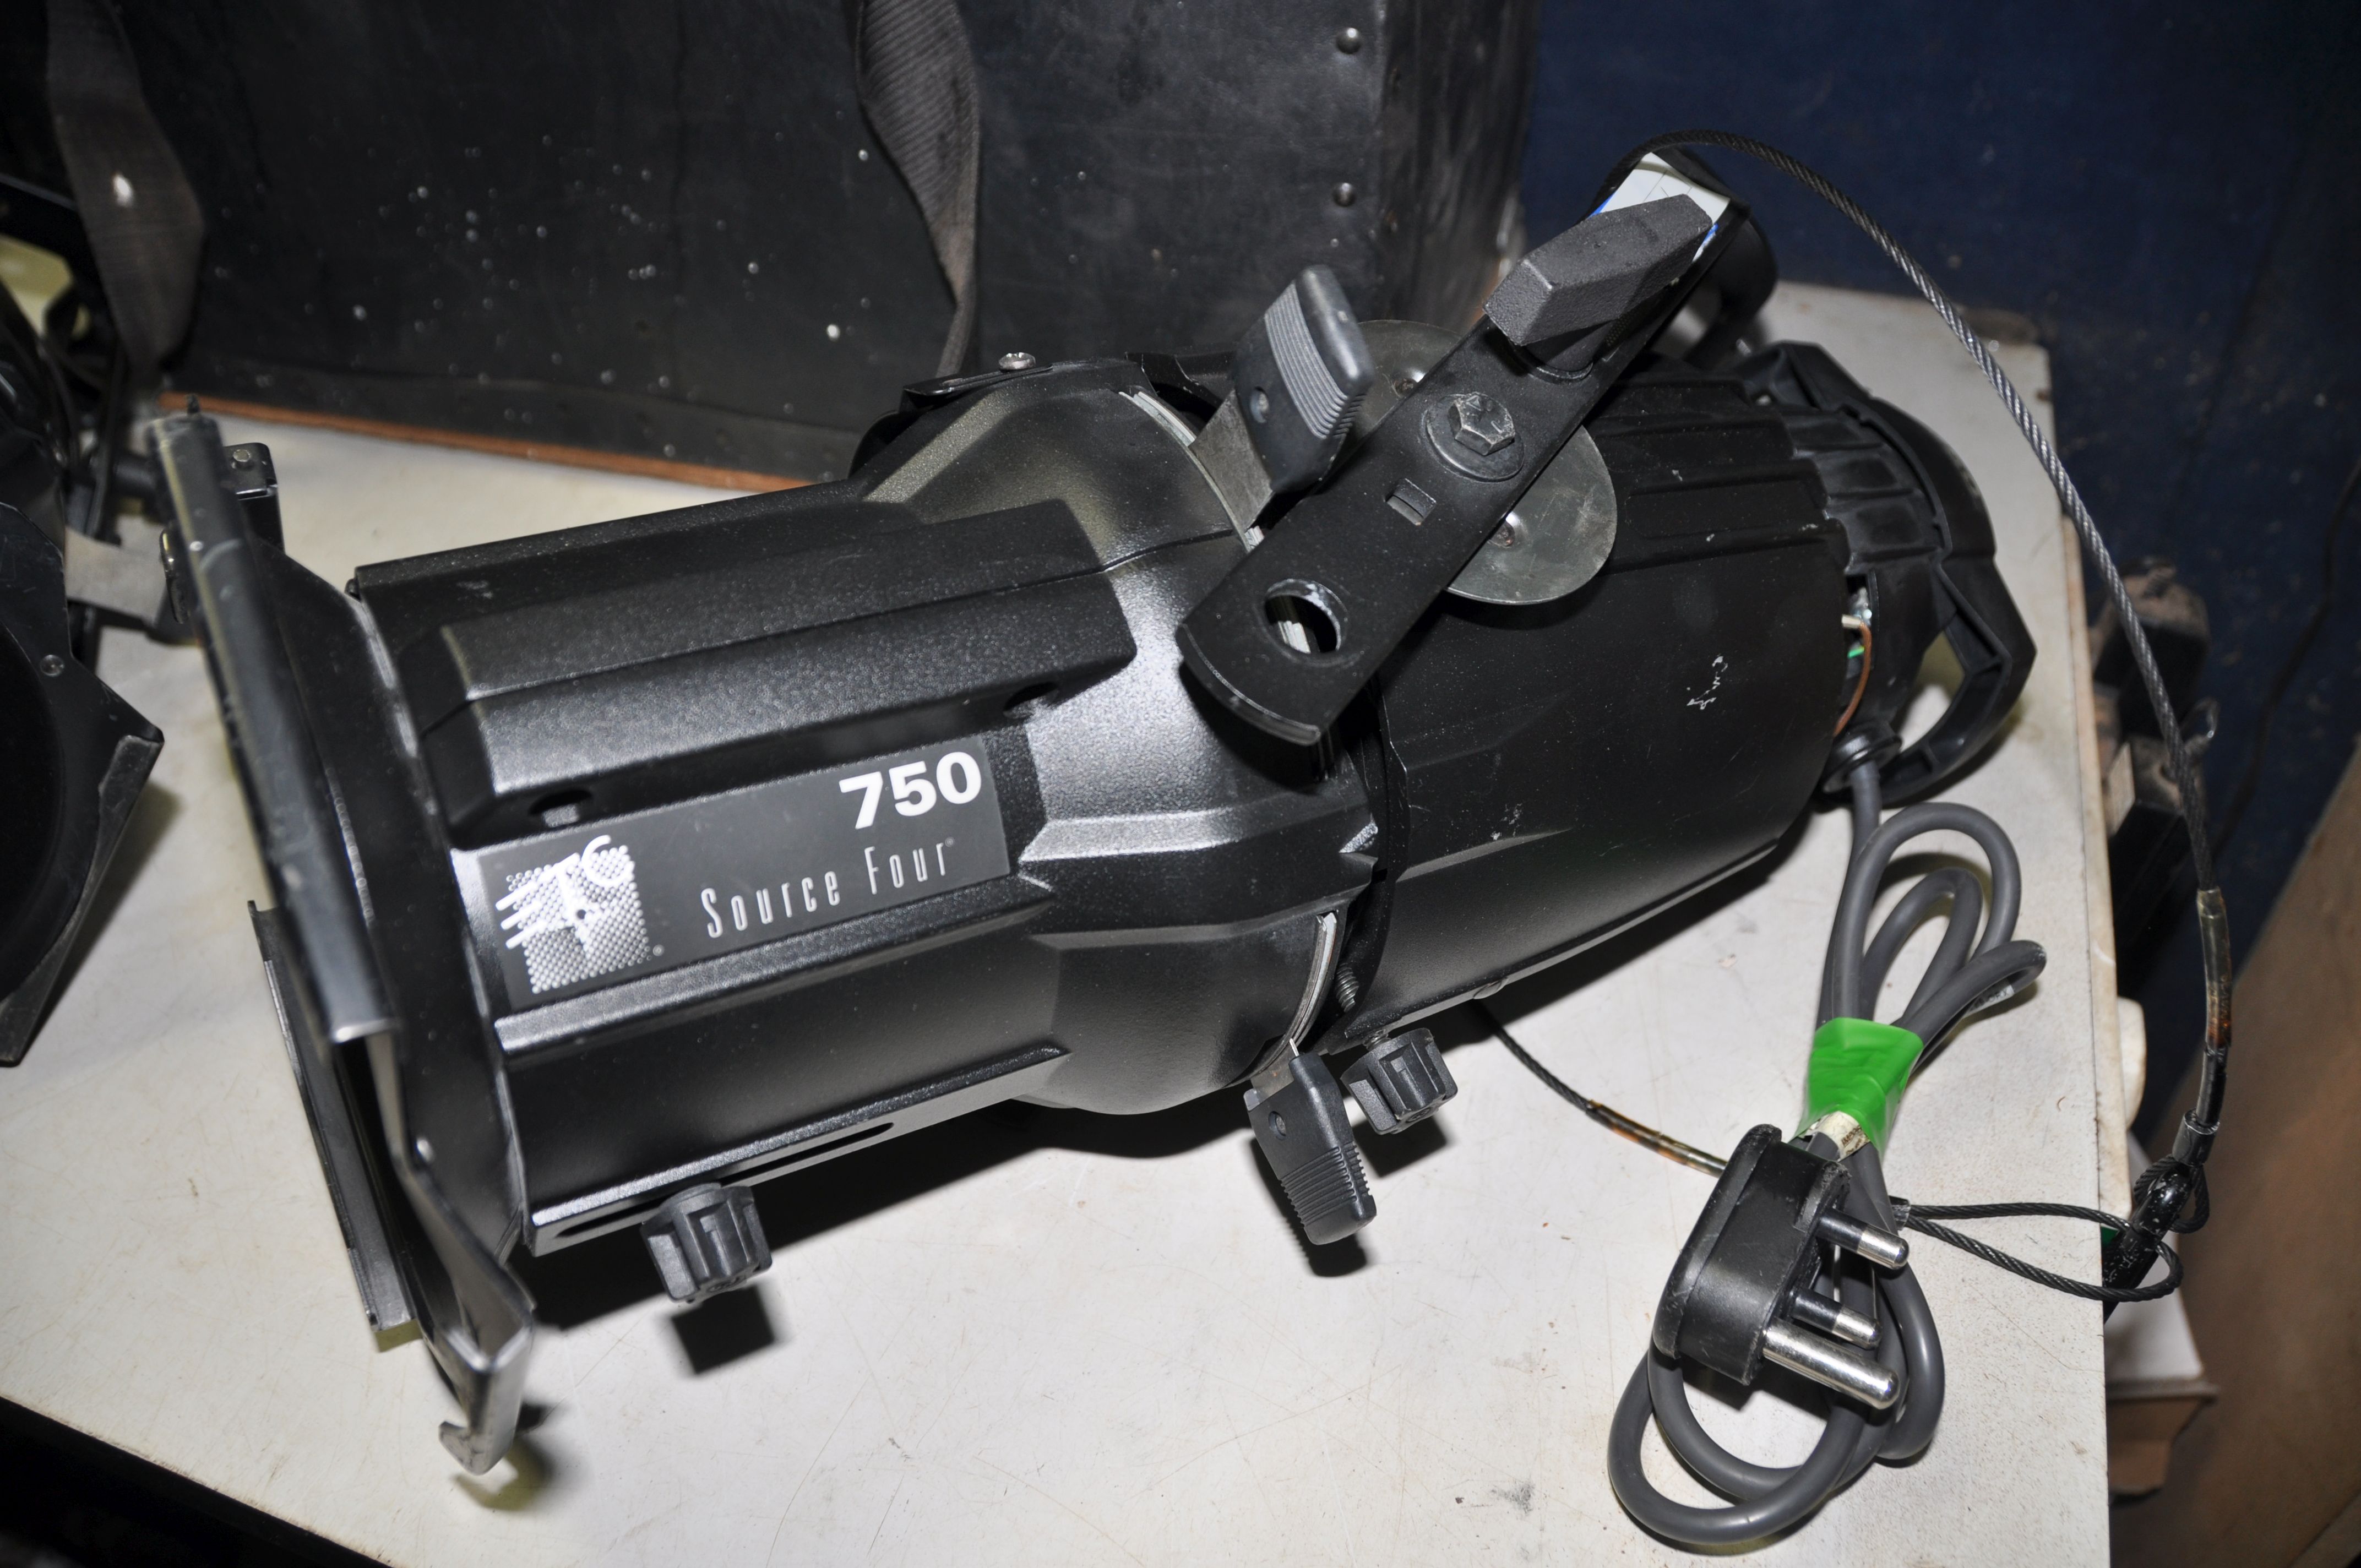 A PAIR OF ETC SOURCE FOUR 750 STAGE LIGHTING in carry case (UNTESTED) - Image 2 of 4